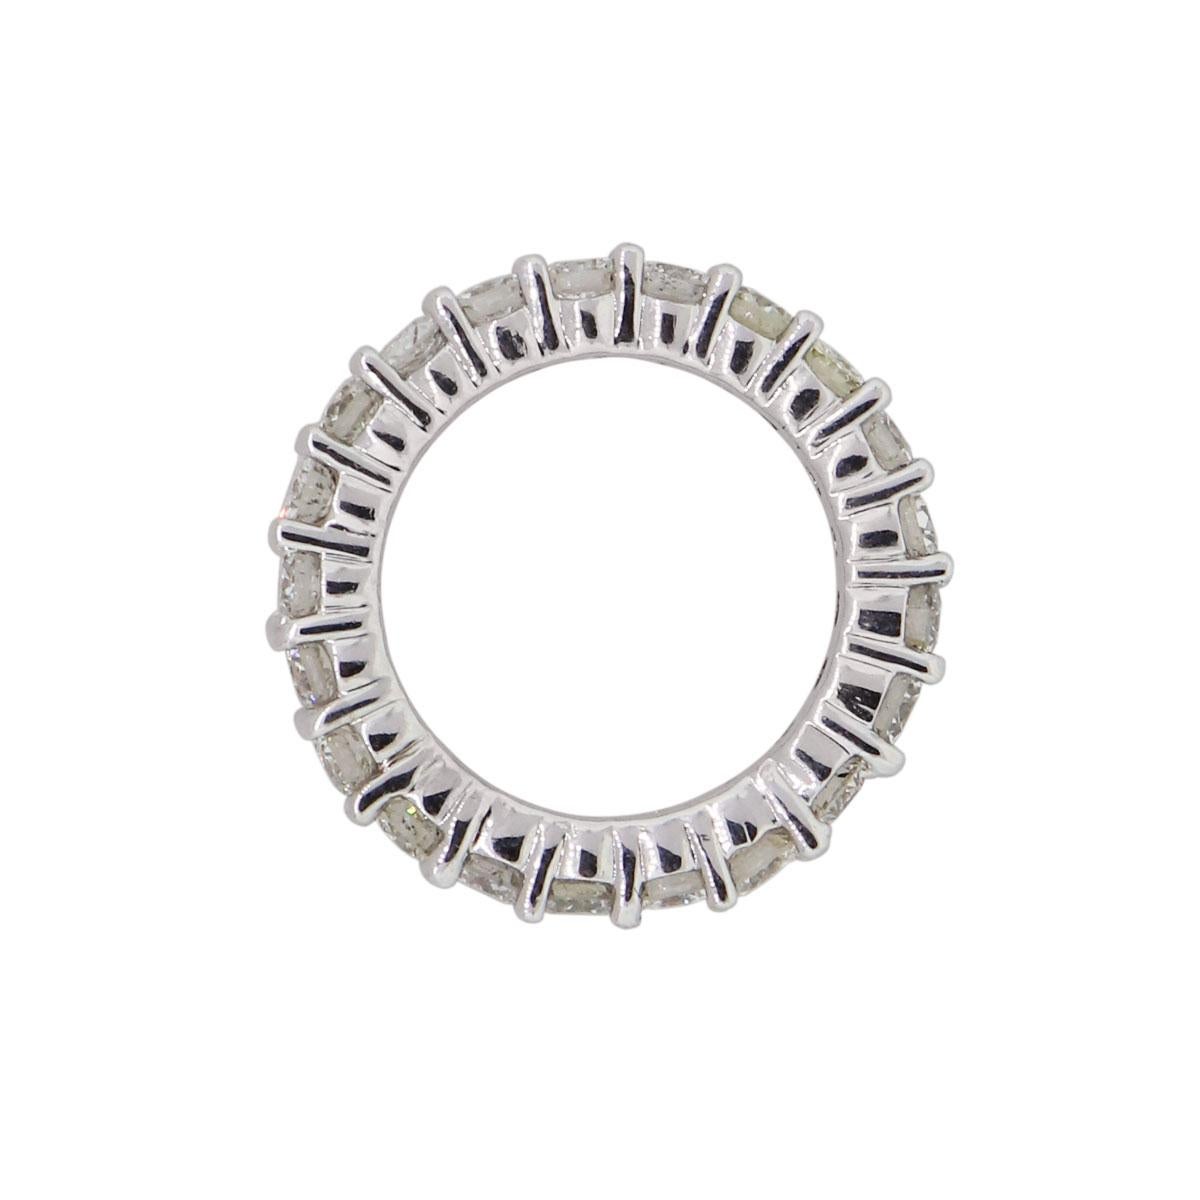 Material: 14k White Gold
Diamond Details: Approx. 2.25ctw of round cut diamonds. Diamonds are G/H in color and VS in clarity
Ring Size: 4.75
Ring Measurements: 0.91″ x 0.12″ x 0.91″
Total Weight: 4.7g (3dwt)
Additional Details: This item comes with